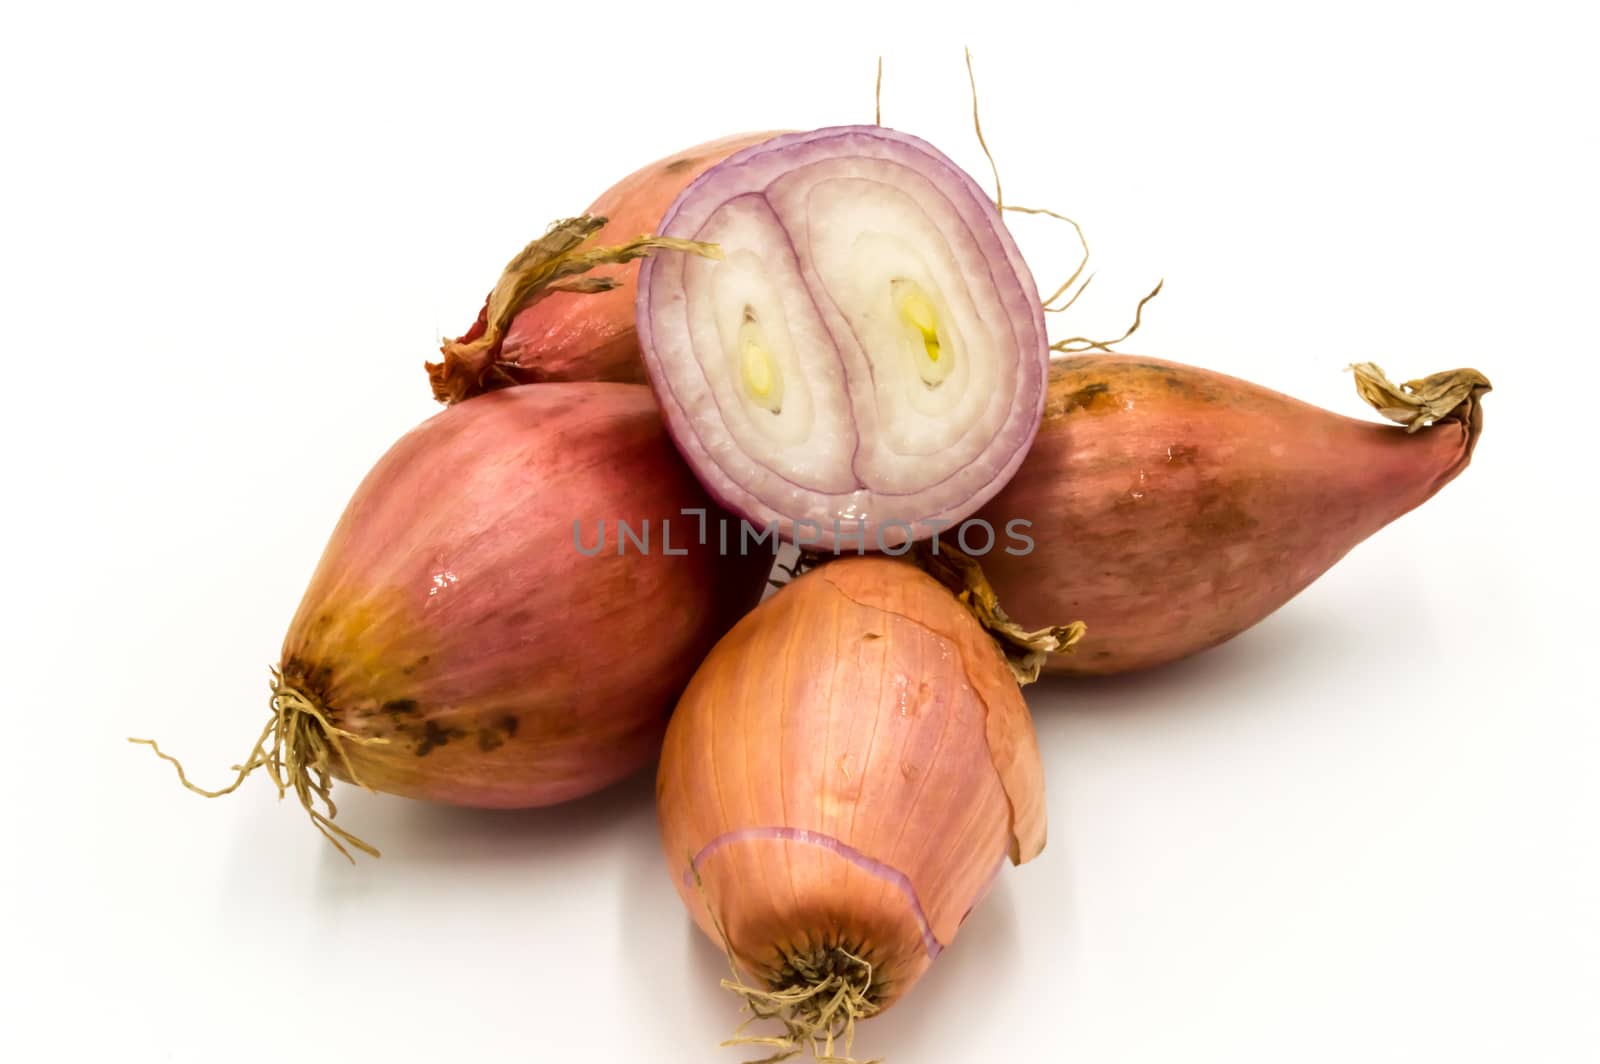 Vegetables: several isolated shallots, one cut in half on a white background